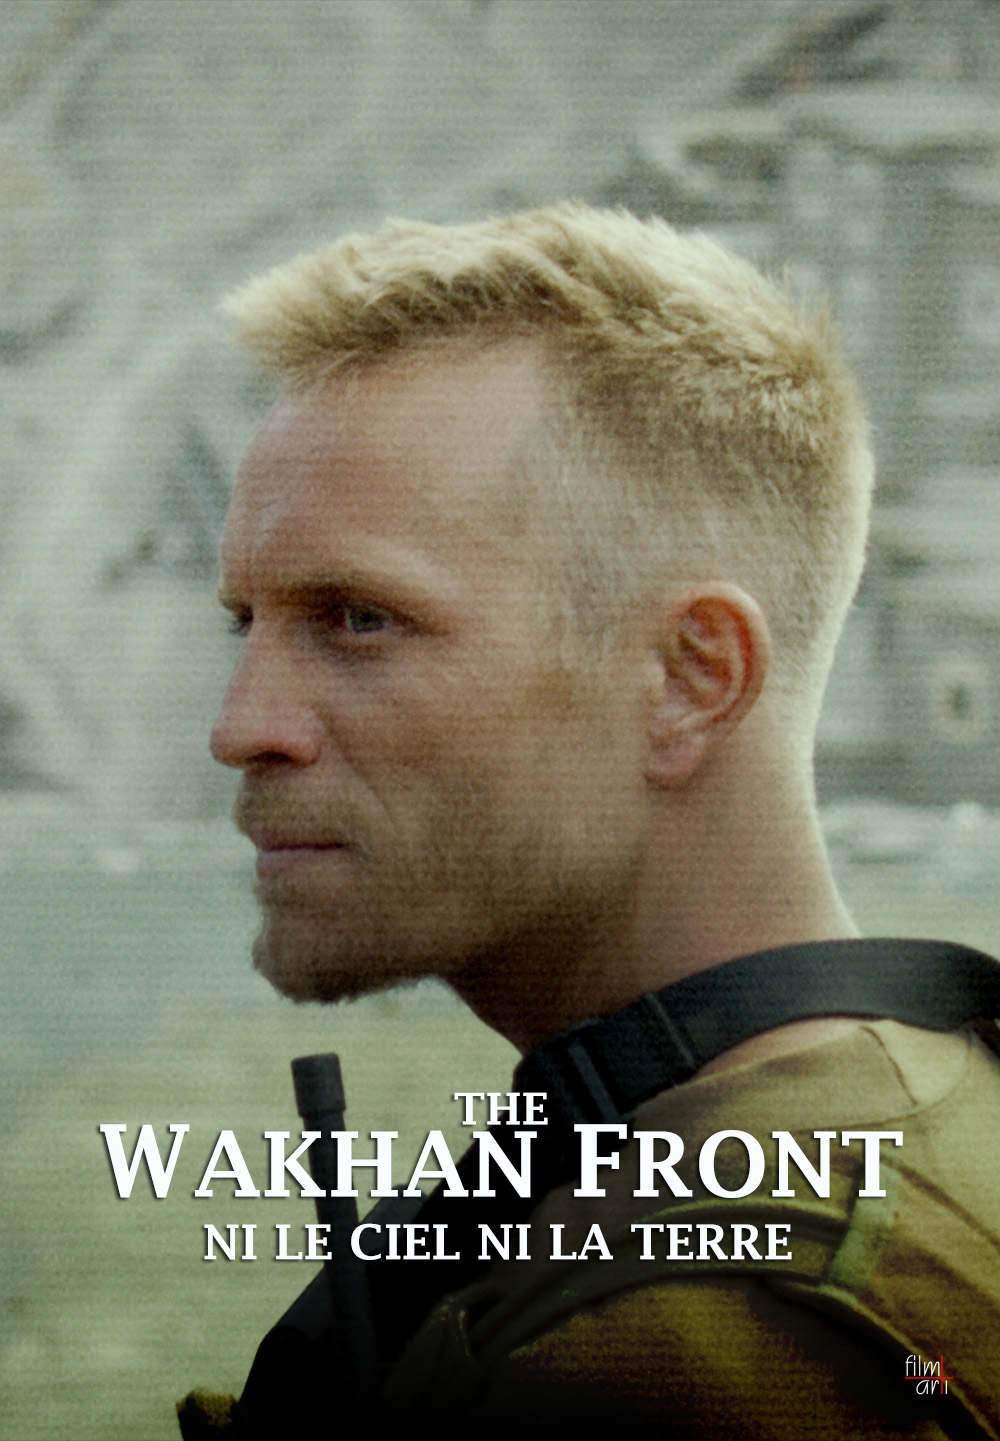  The Wakhan Front (2015) Poster 